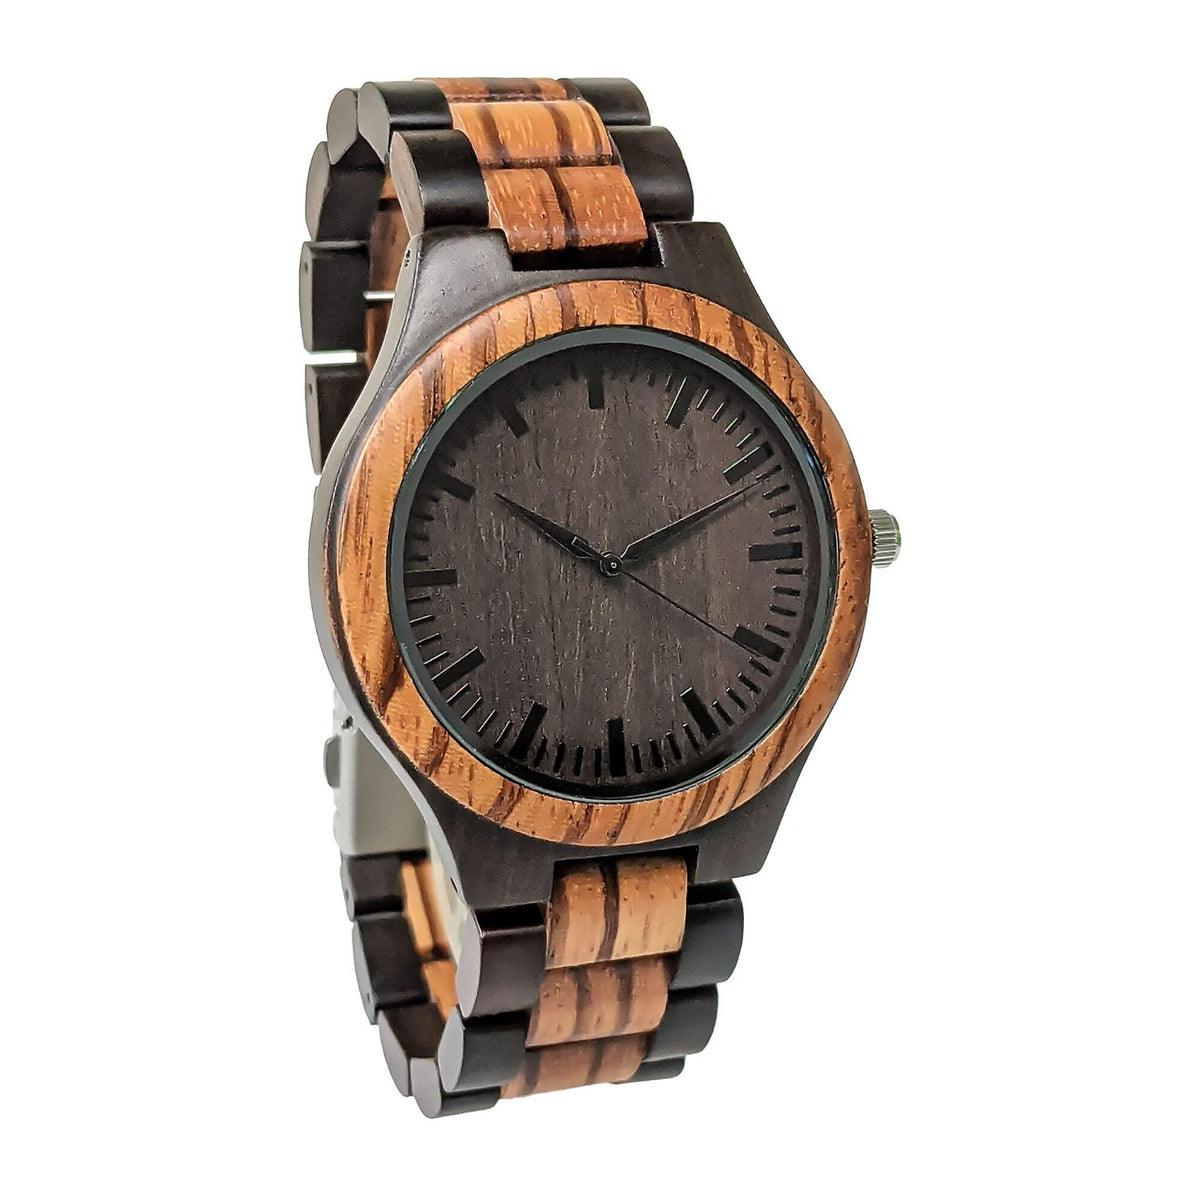 Personalized Wood Watch Perfect for 5-year Anniversary Gift -    Personalized wood watch, Engraved wood watch, Wooden watch engraved